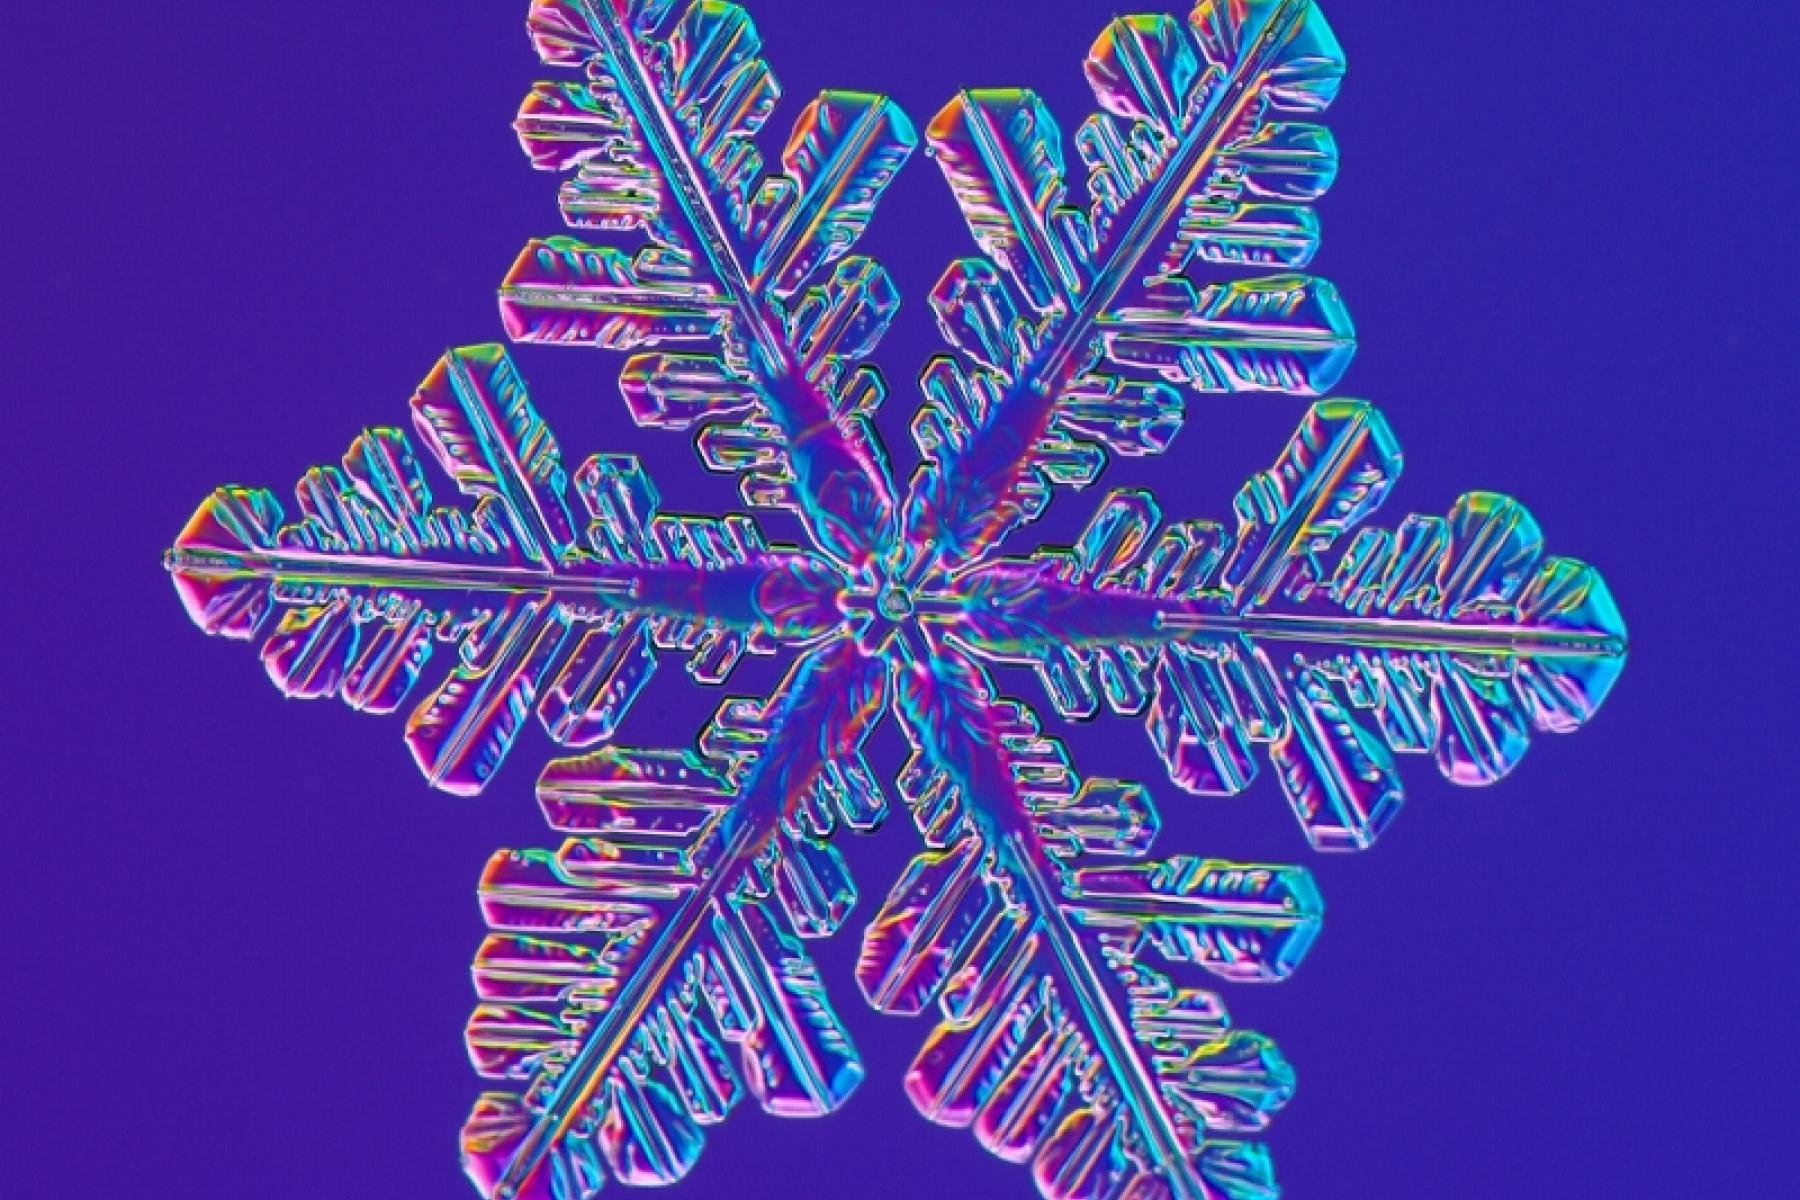 A magnified image of a snowflake